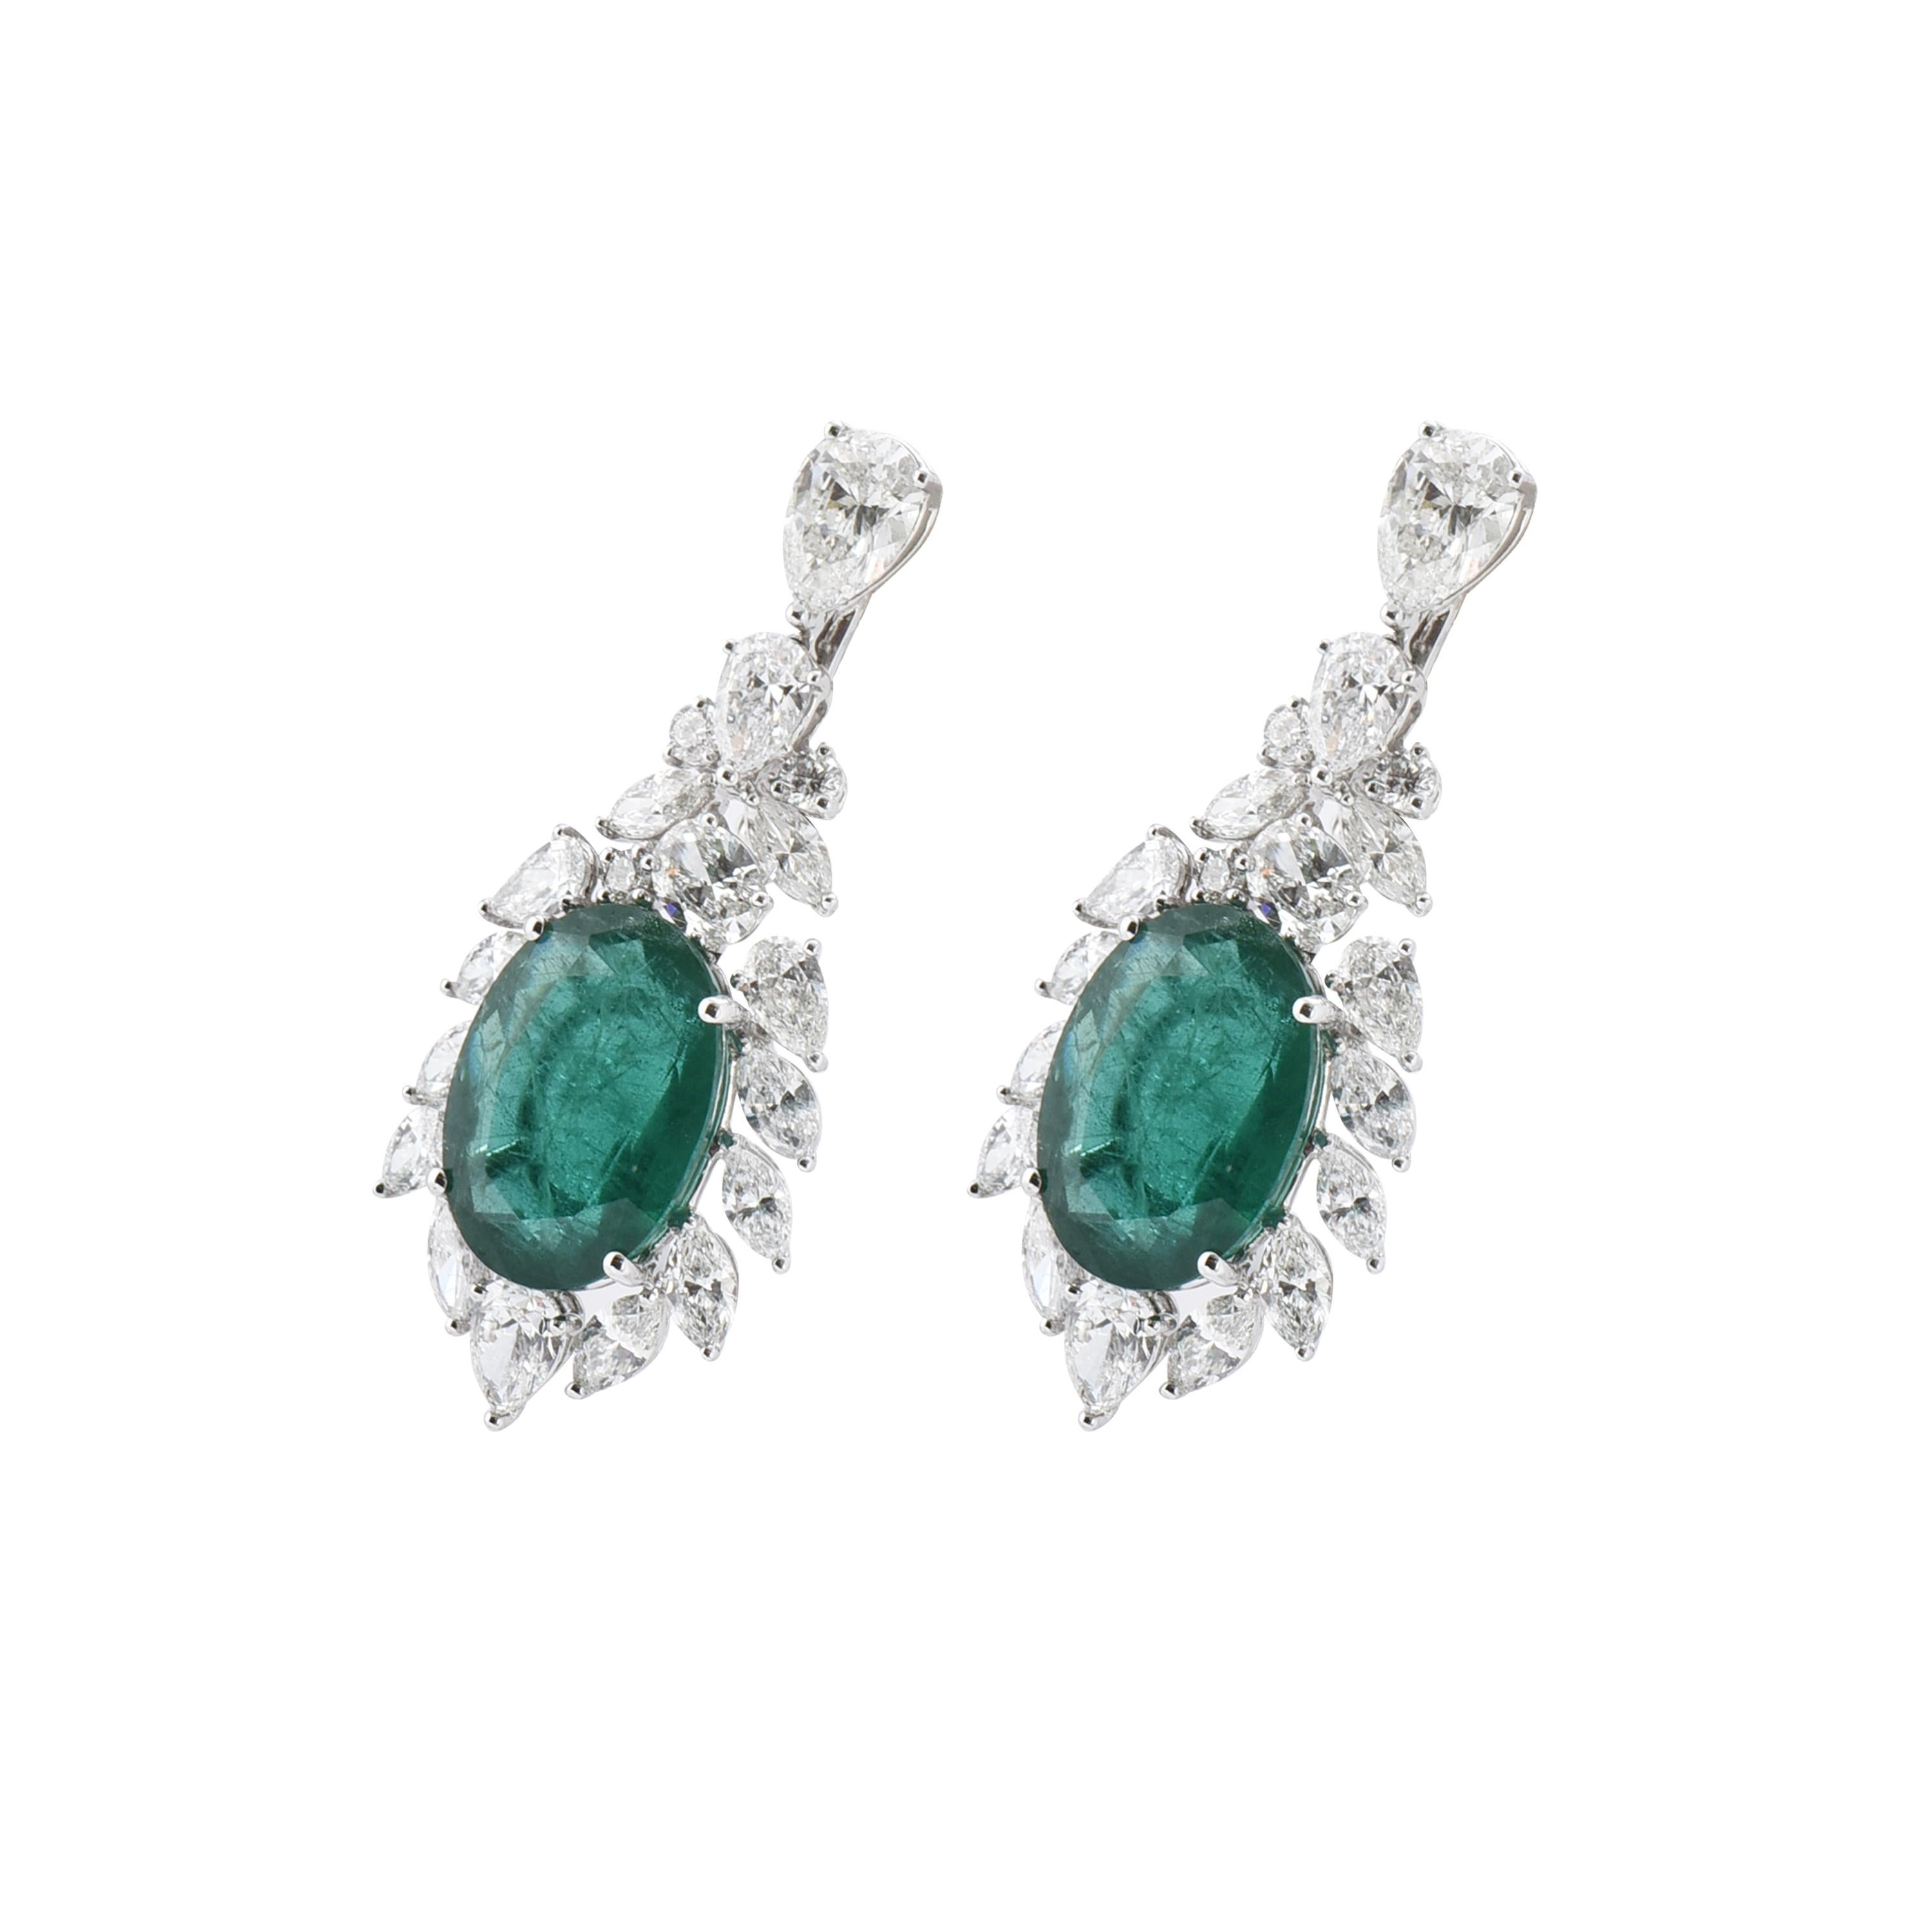 A pair of 18 karat white gold emerald earrings from the Viridian collection of Laviere. The earrings are set with two oval shape emeralds weighing a total of 13.59 carats, 3.41 carats pear shape brilliant-cut diamonds, 2.69 carats marquise shape